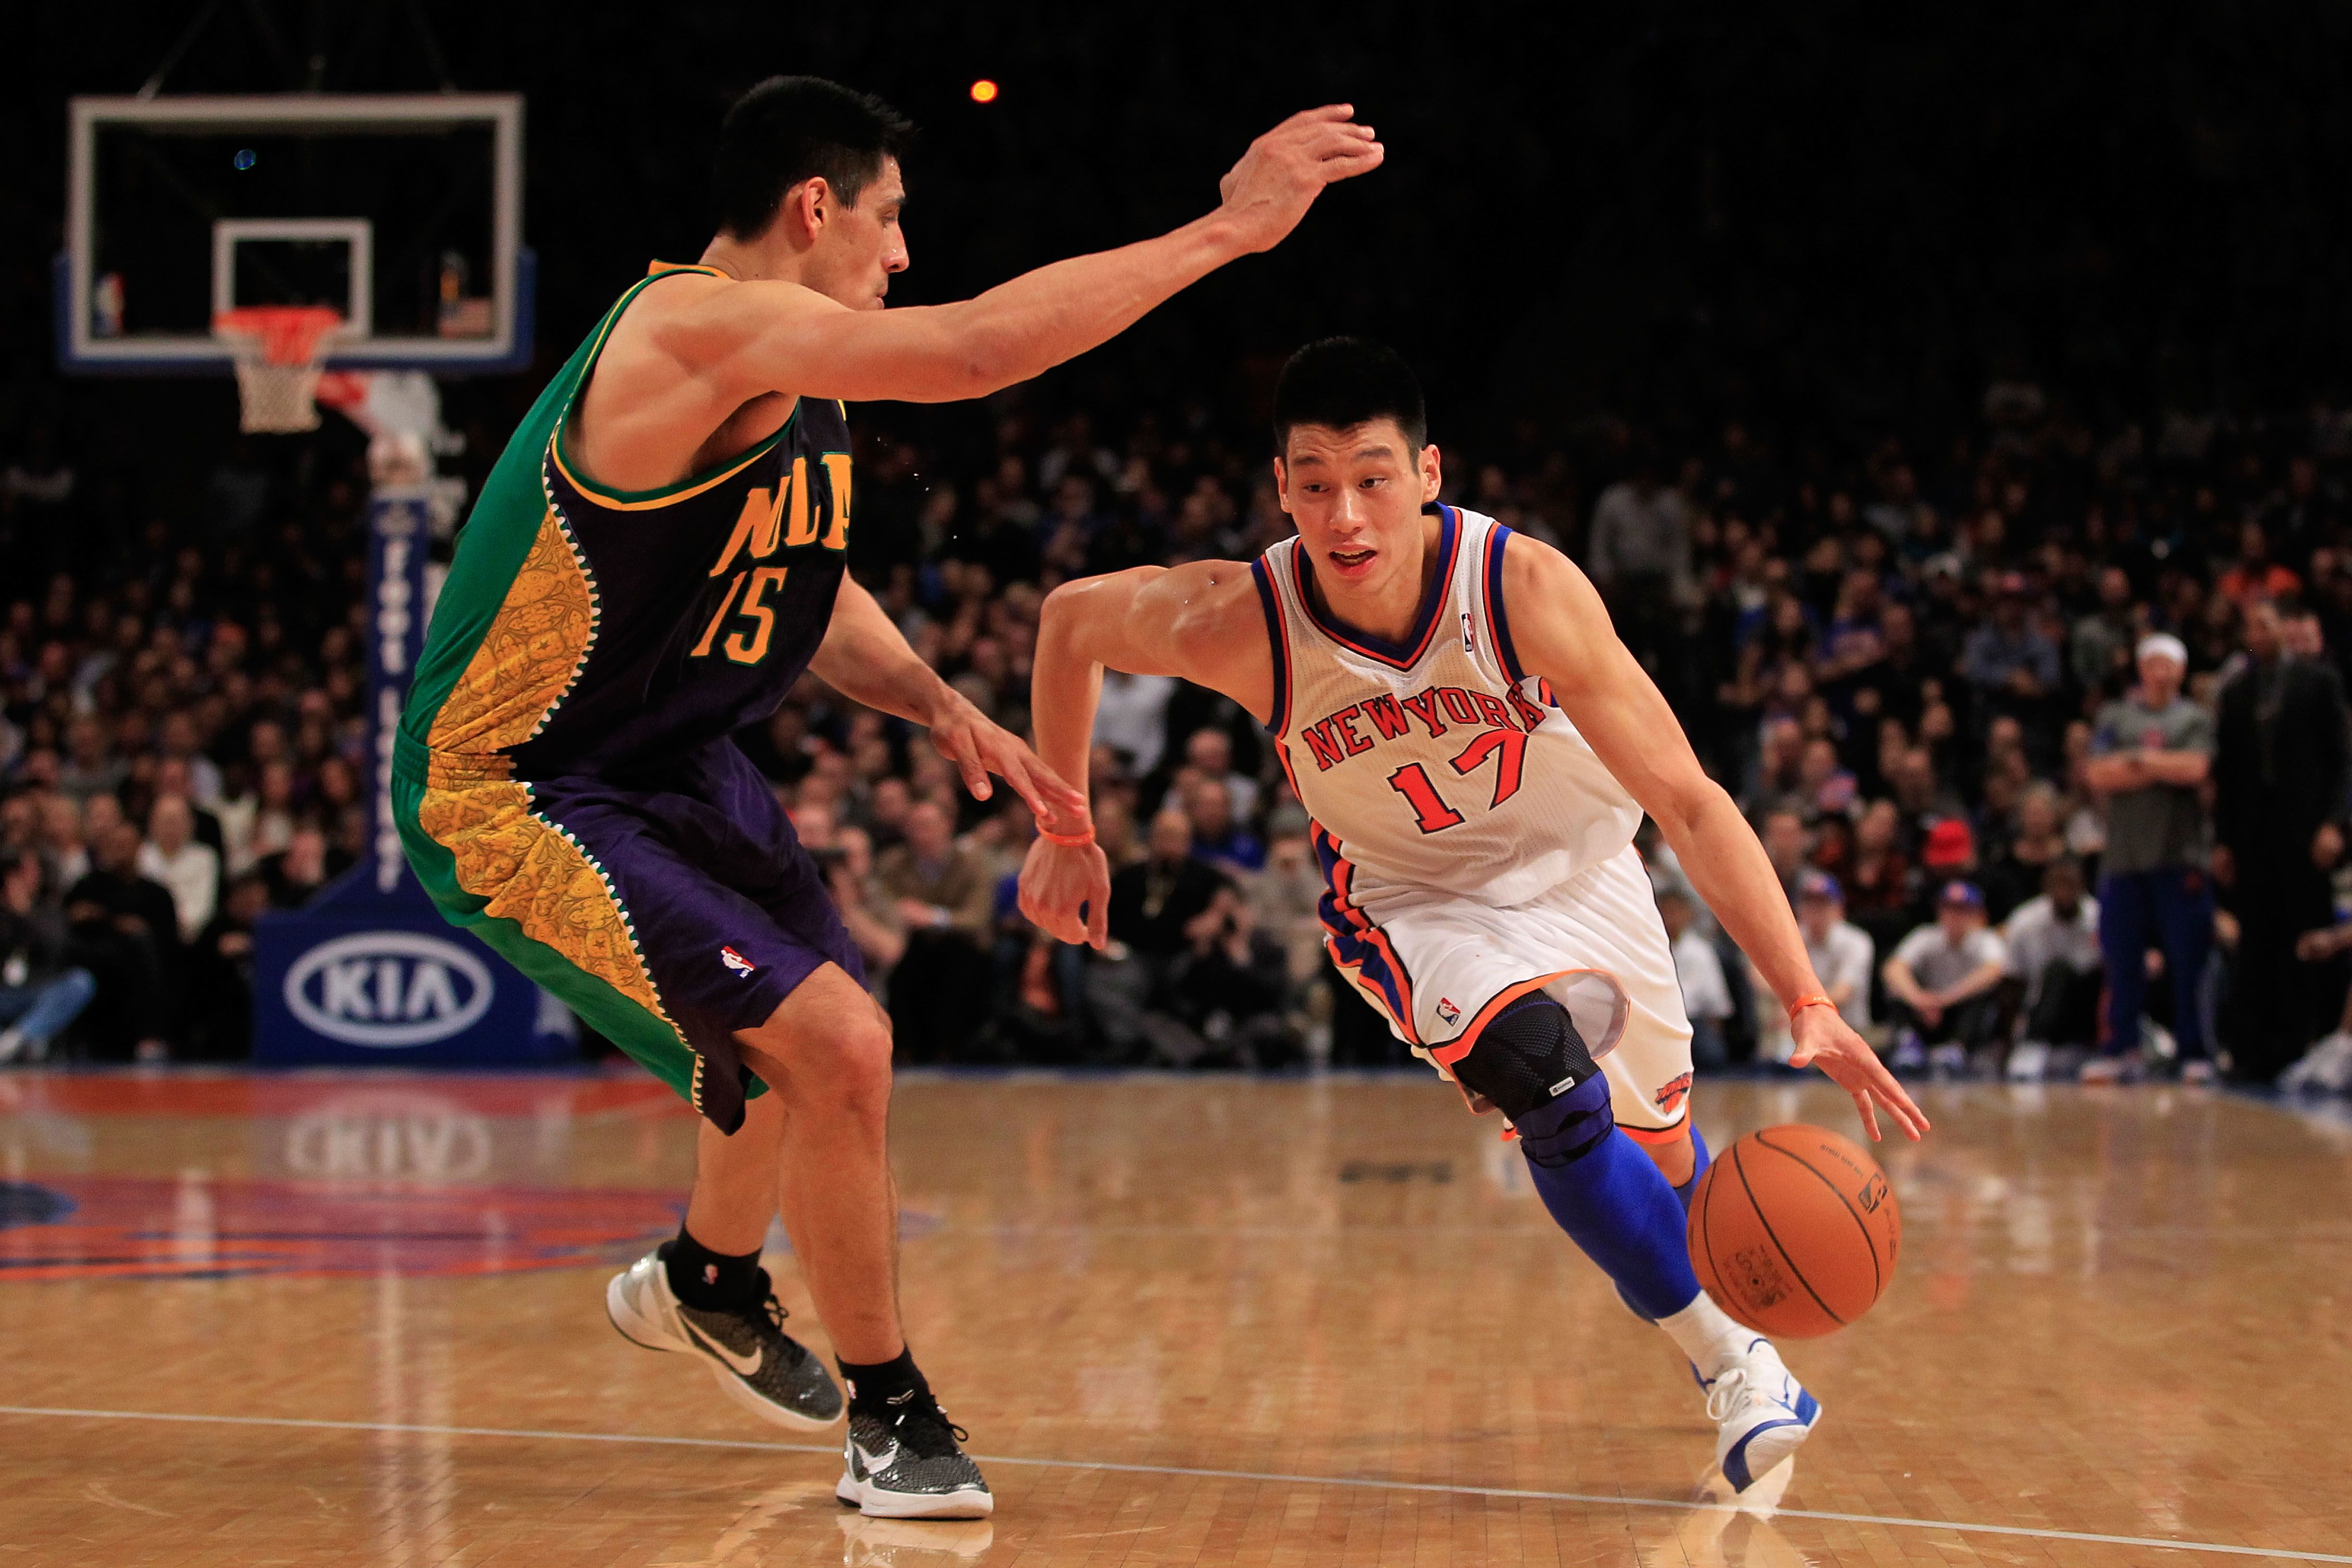 Linsanity Continues: Jeremy Lin Scores 38, Knicks Beat Lakers